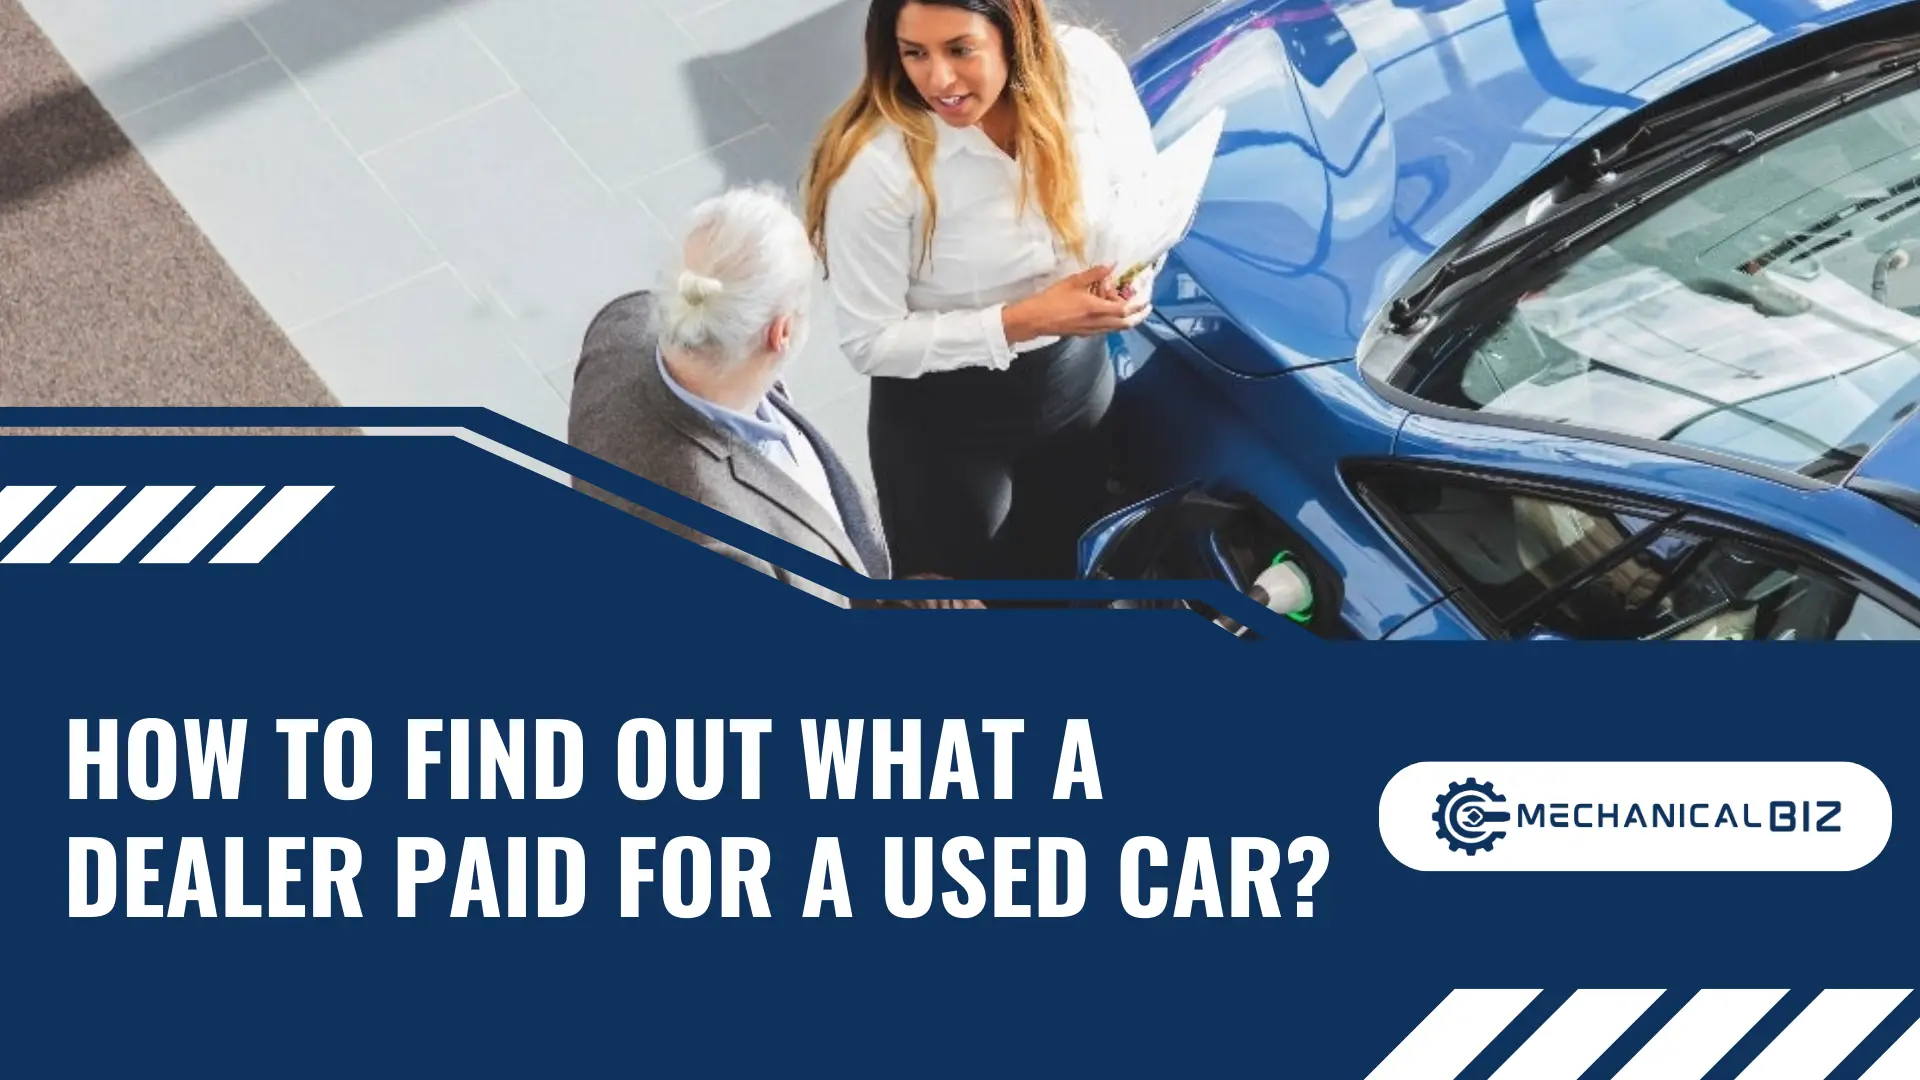 How to Find Out What a Dealer Paid for a Used Car